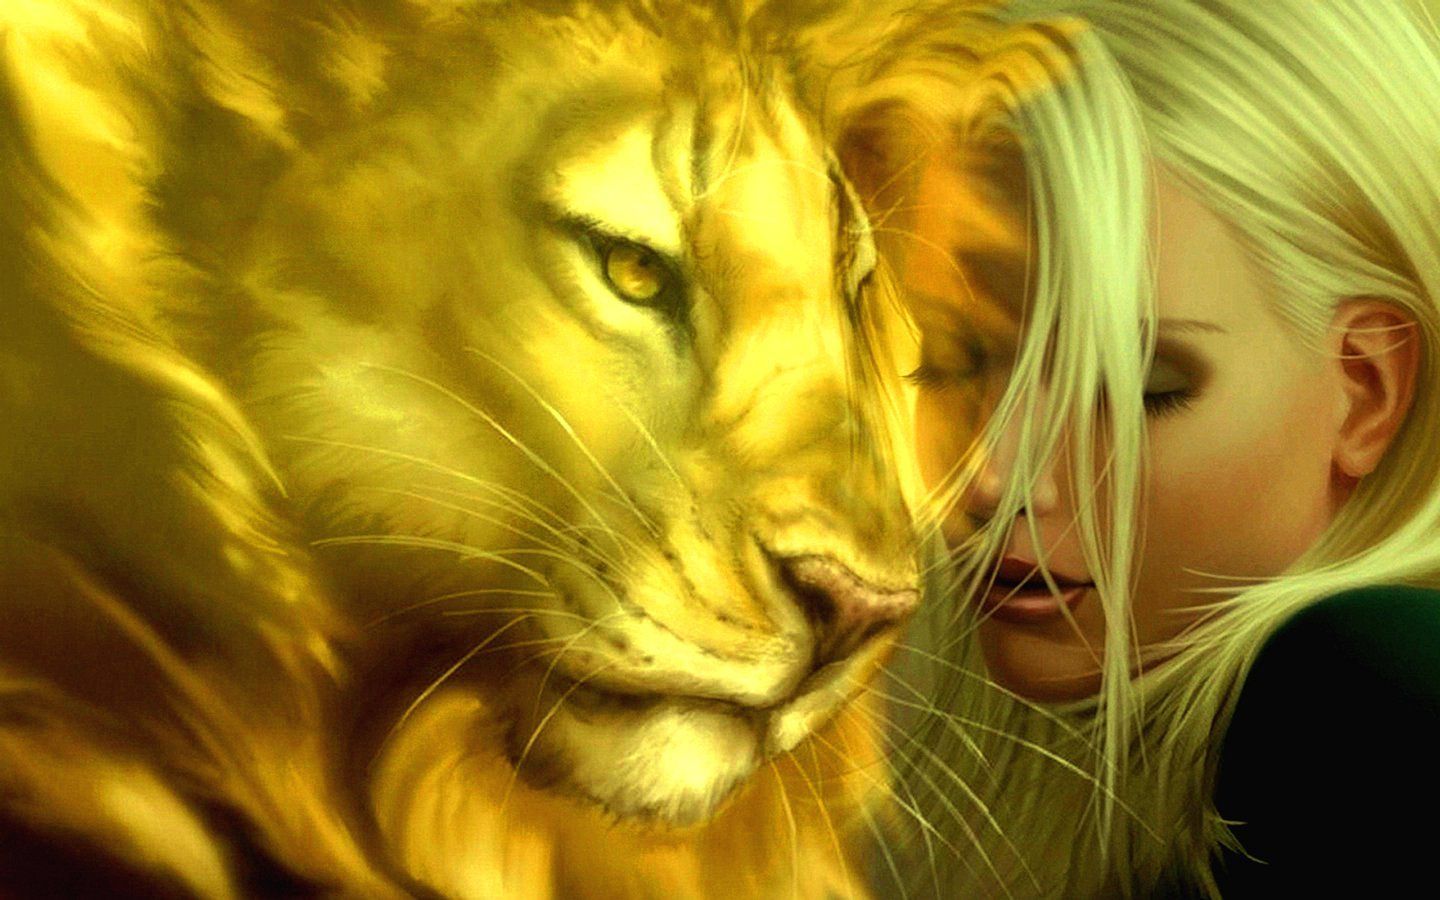 Wallpaper Lion And Girl Fantasy x 900 Fairy